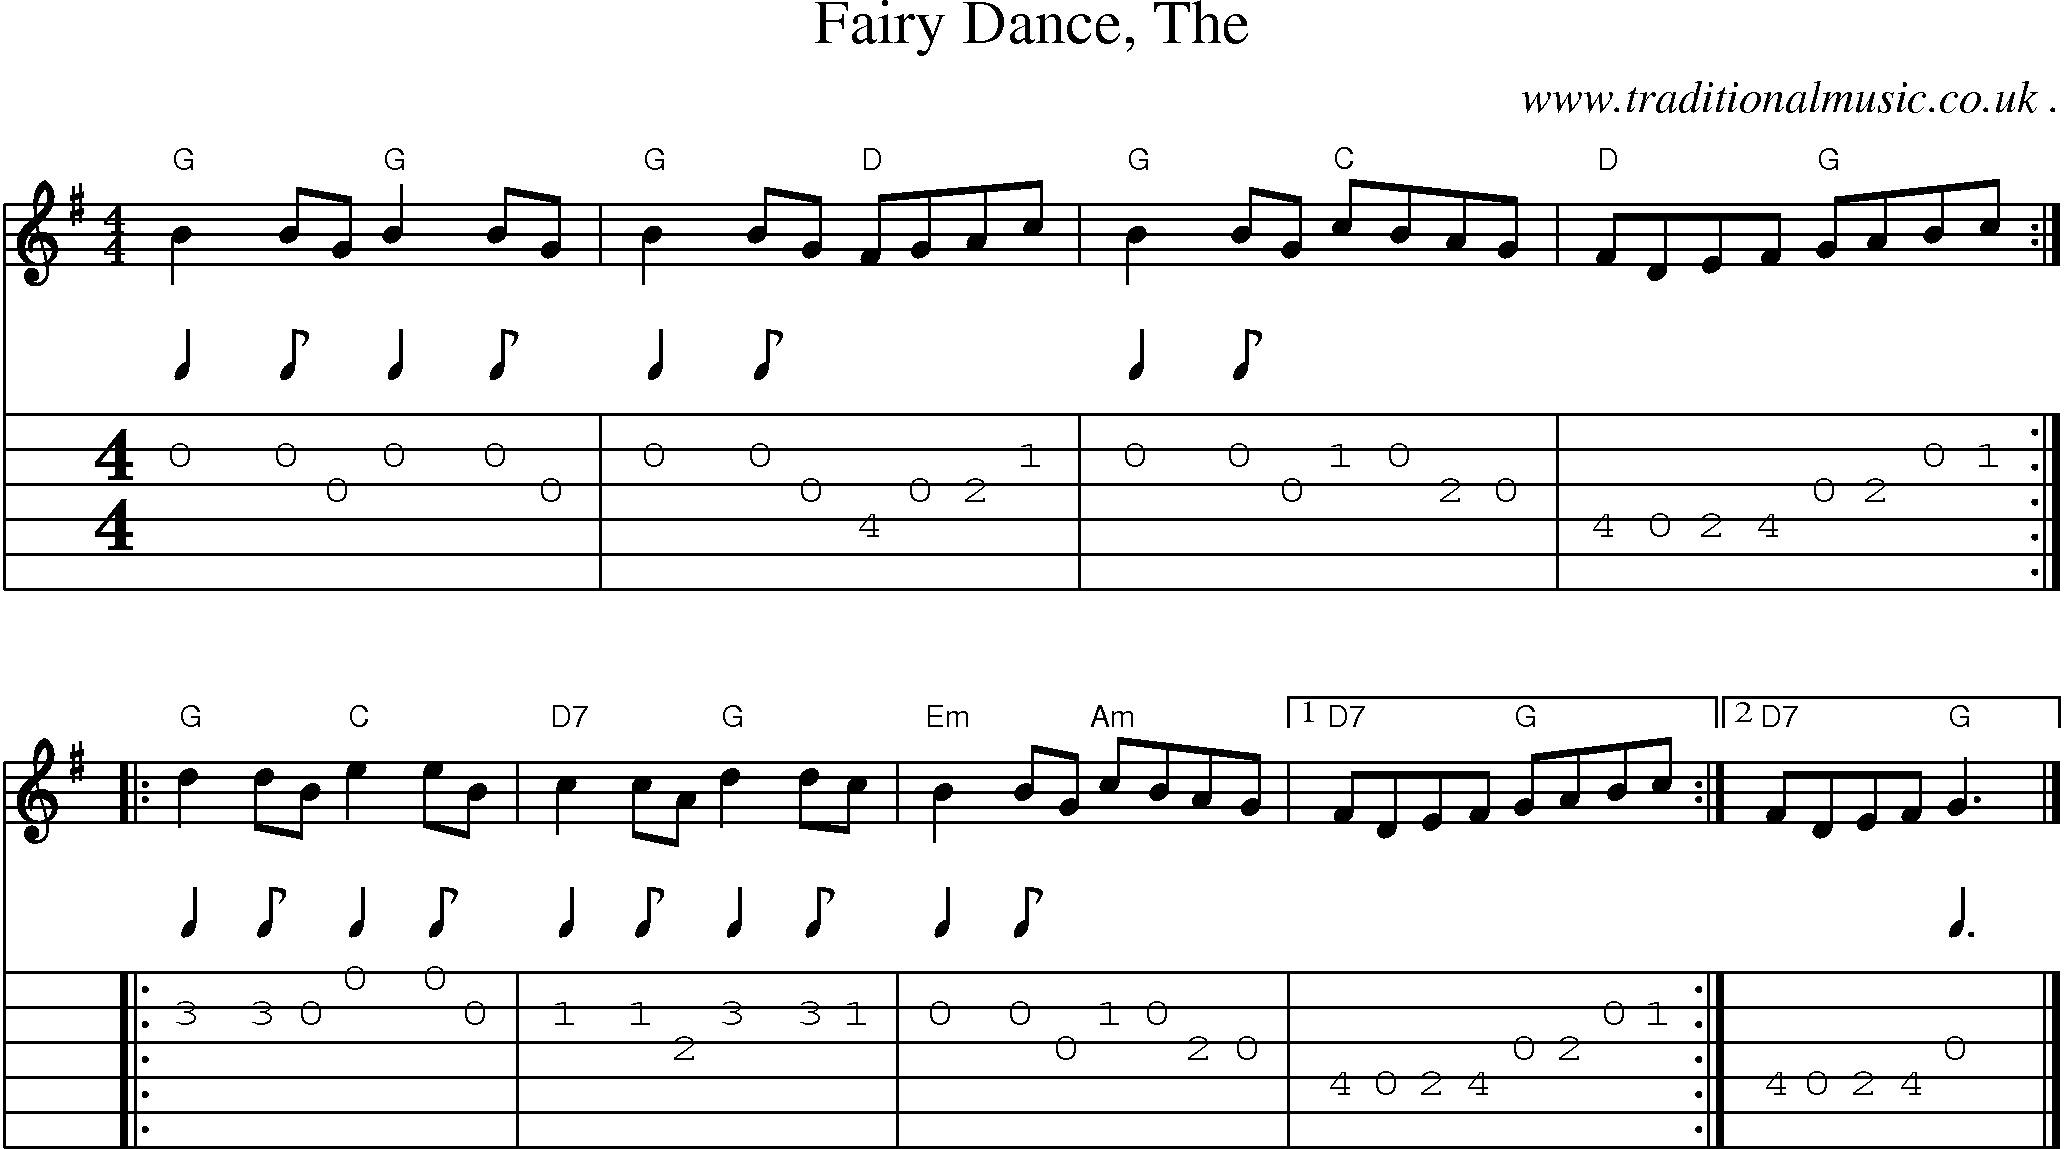 Music Score and Guitar Tabs for Fairy Dance The